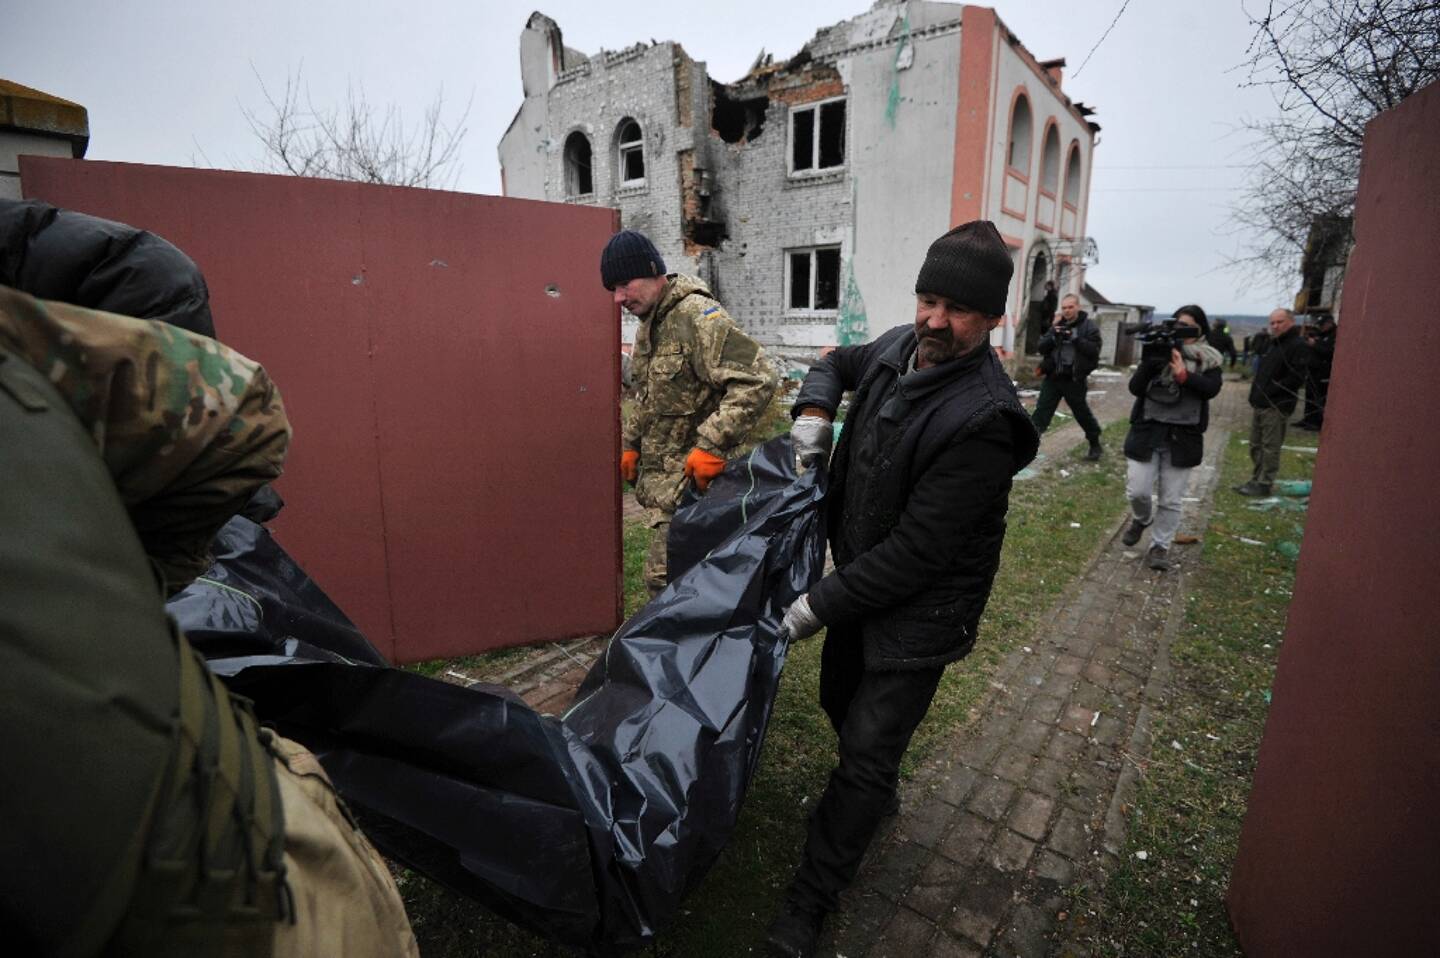 Rescue workers carry the body of a victim in Andriivka, near Kiev, on April 11, 2022 in Ukraine.